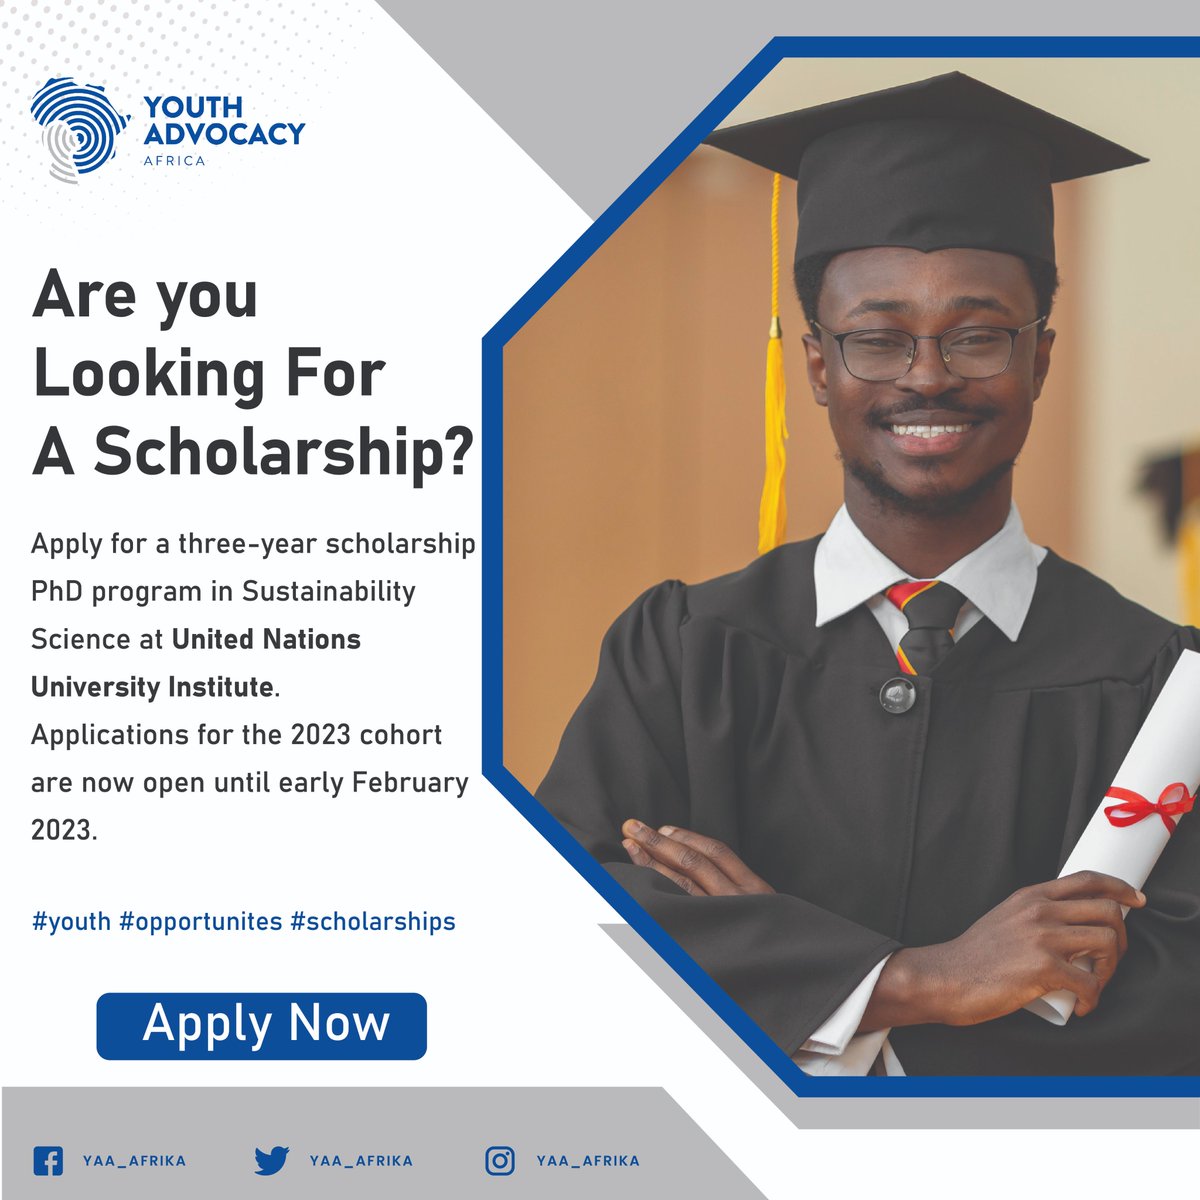 The UN University Institute for the Advanced Study of Sustainability offers a 3 yr PhD program in #Sustainability Science, #developingcountries students are eligible for a #scholarship offered by the Japan Foundation for UNU. Apply Here: ias.unu.edu/en/admissions/… #opportunities